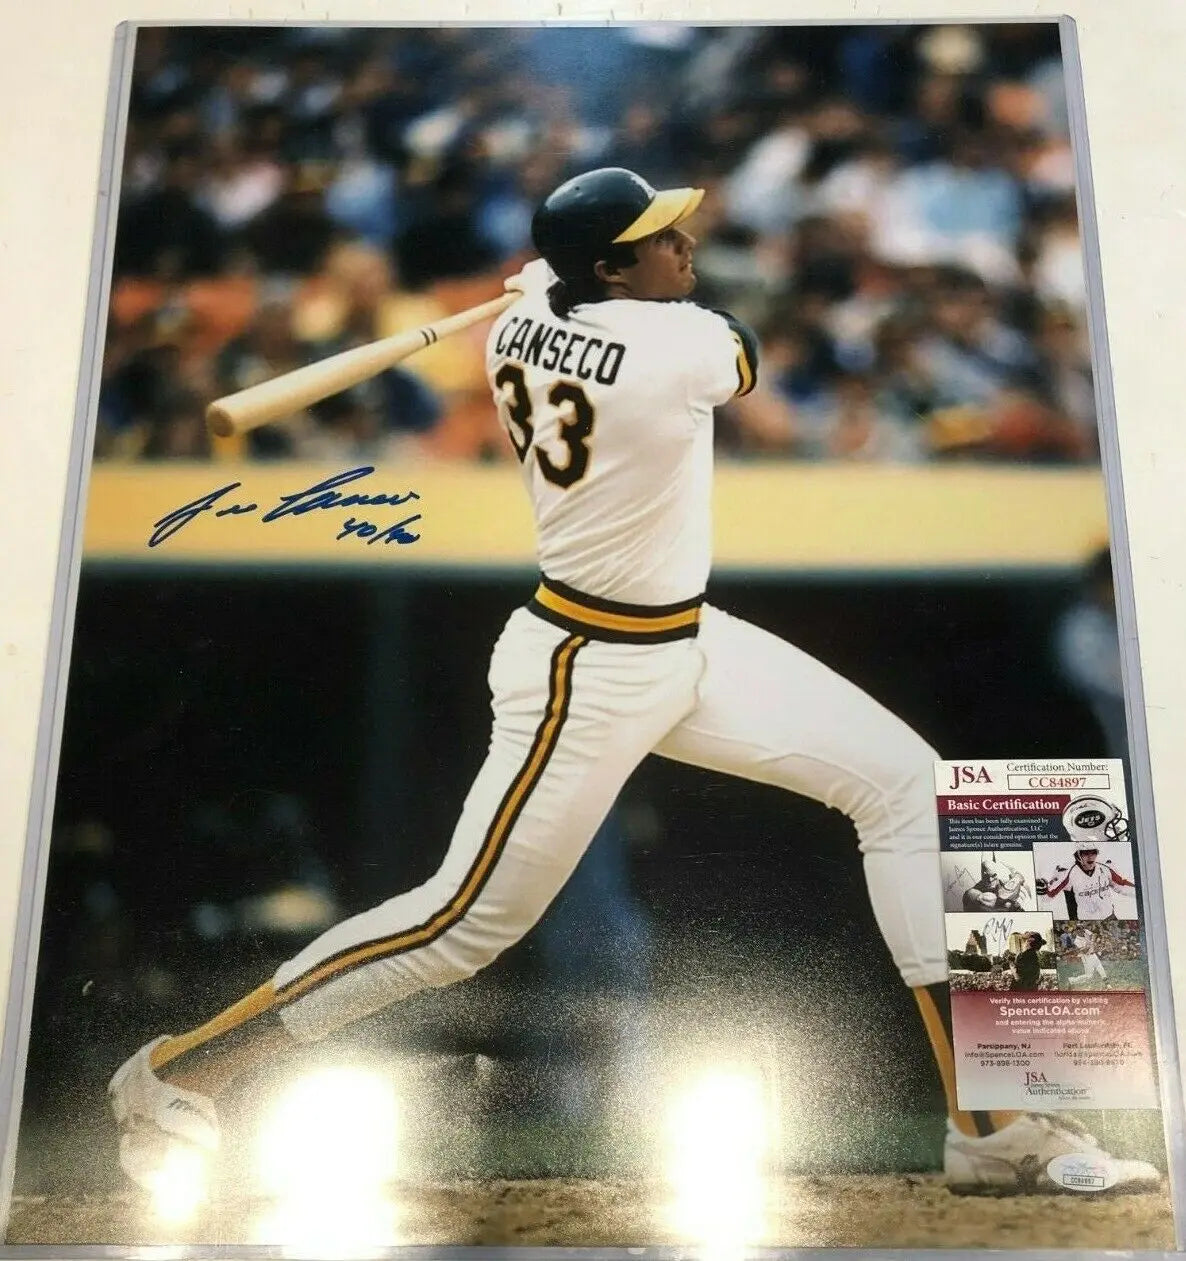 MVP Authentics Jose Canseco Autographed Signed Inscribed Oakland A's 16X20 Photo Jsa Coa 54 sports jersey framing , jersey framing